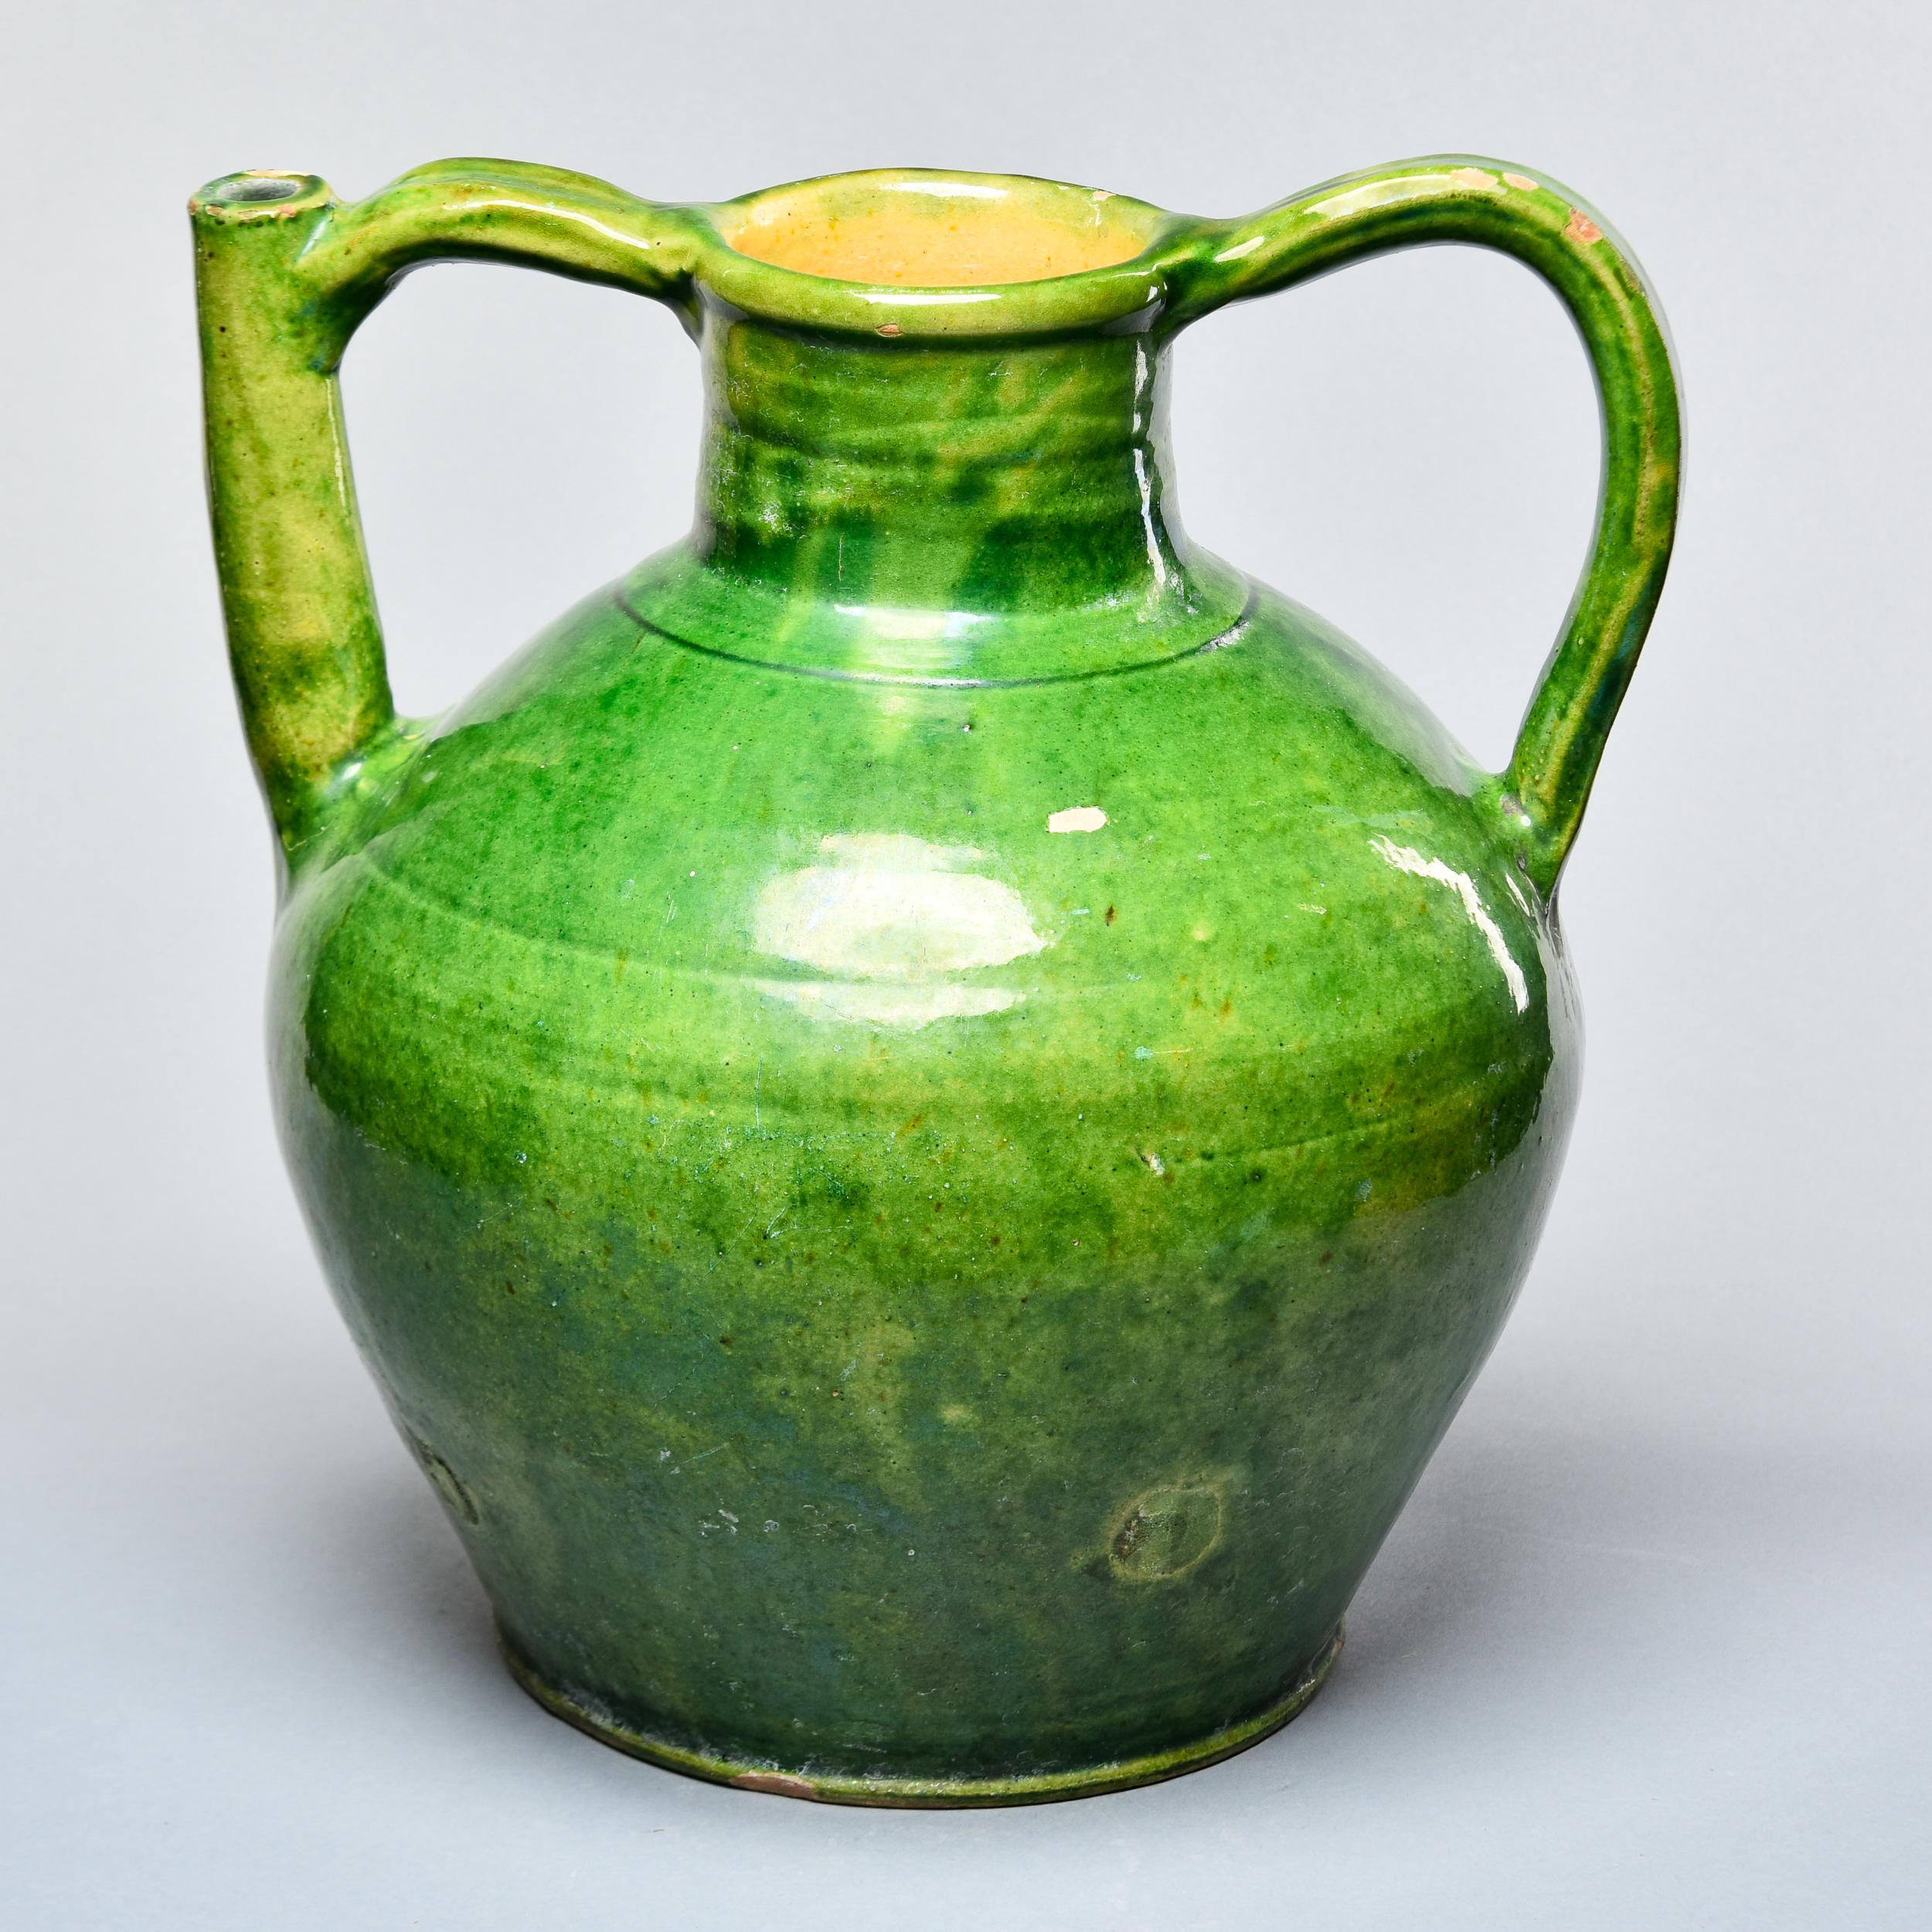 Found in France, this French glazed ceramic water jar dates from approximately 1915. This piece stands 13.5” high and has a wide vessel body, narrow neck and two handles on the sides, one of which also functions as a pouring spout.  The piece has a